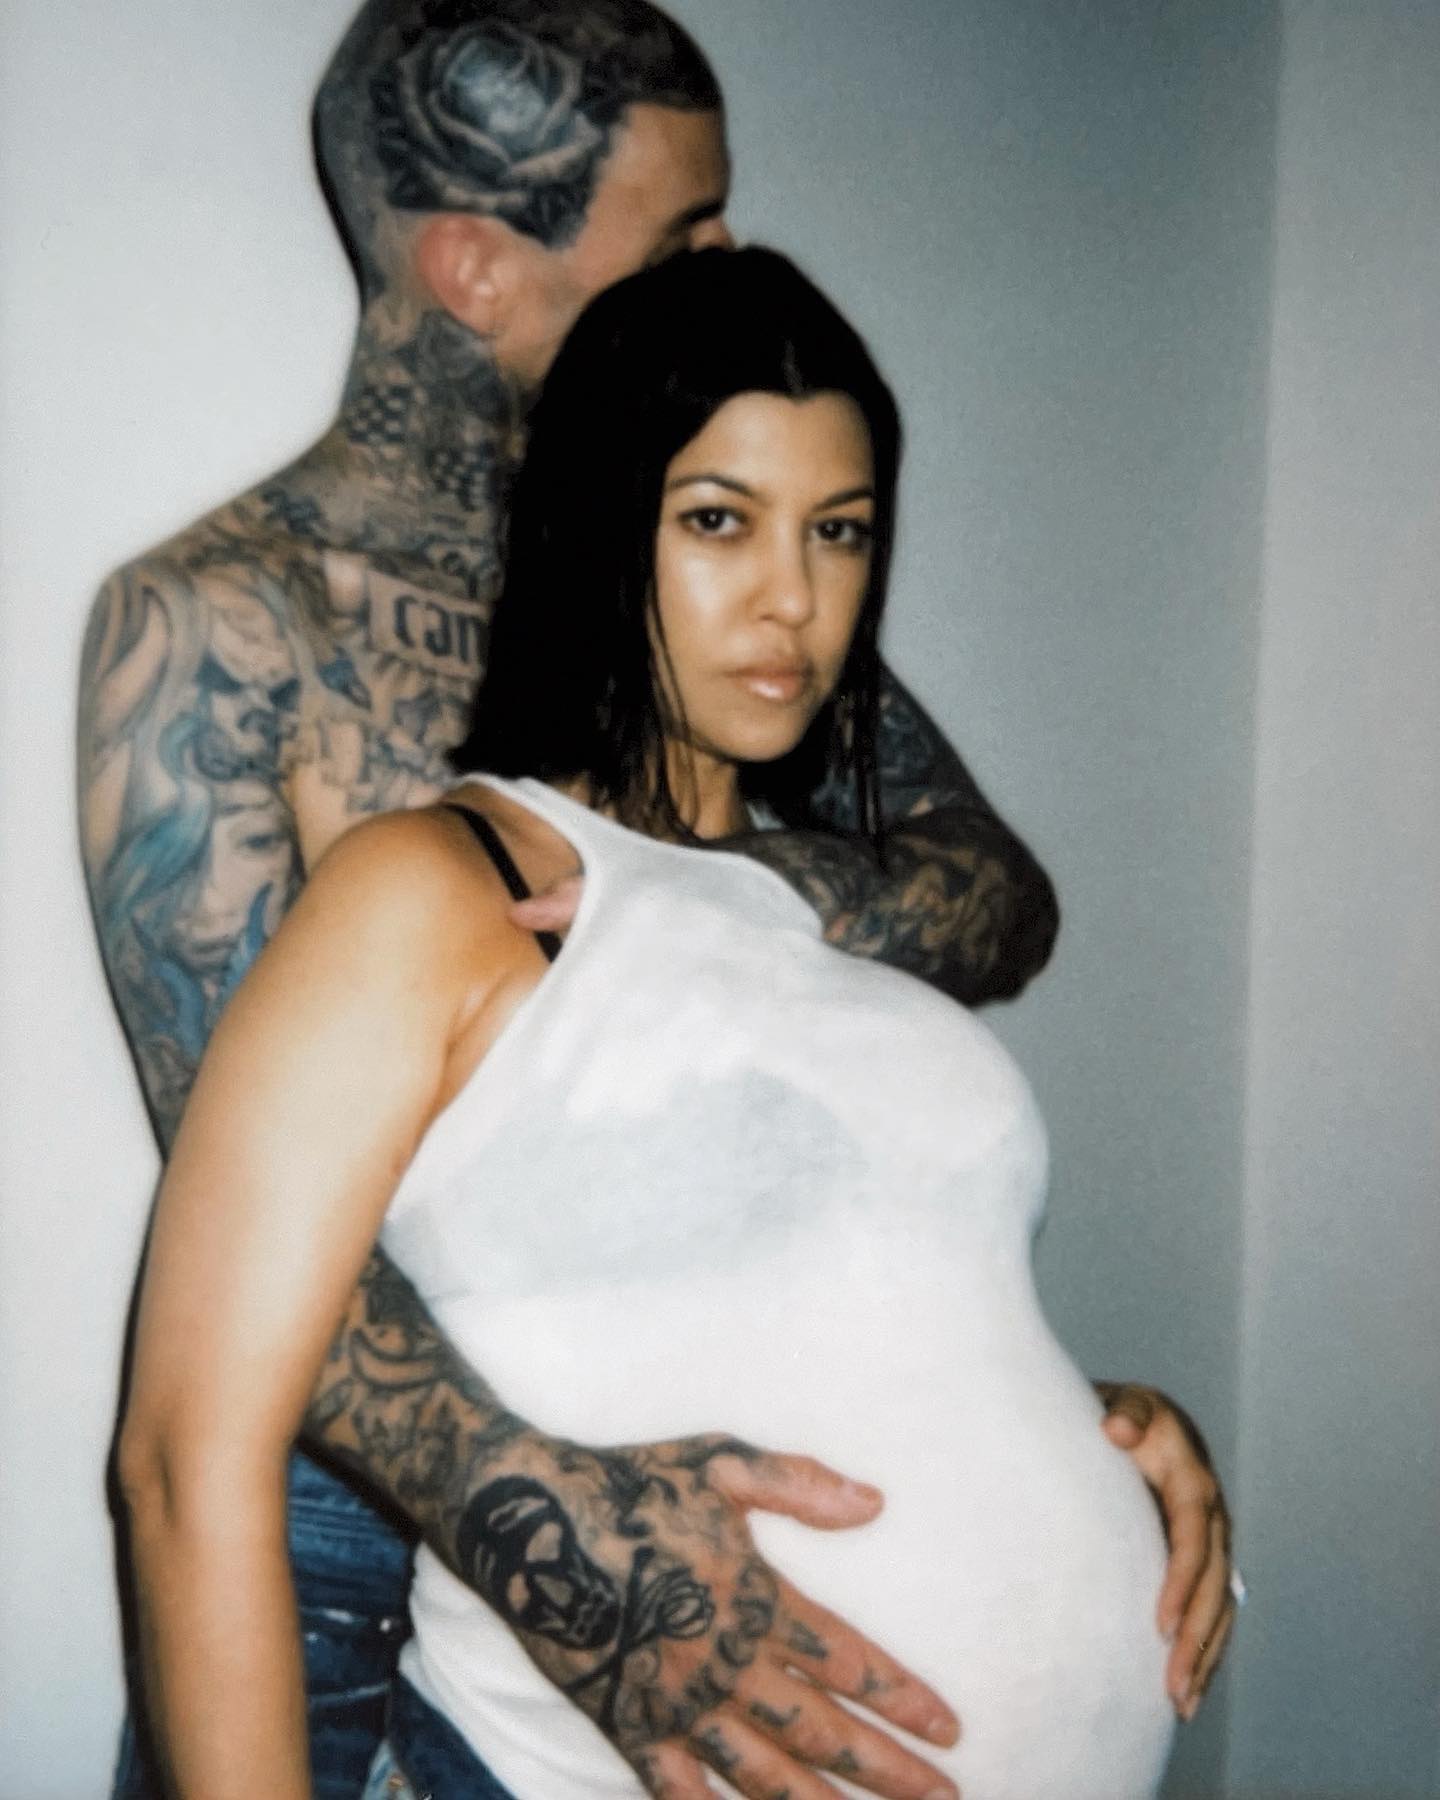 Kourtney has been taking her time since giving birth to baby Rocky